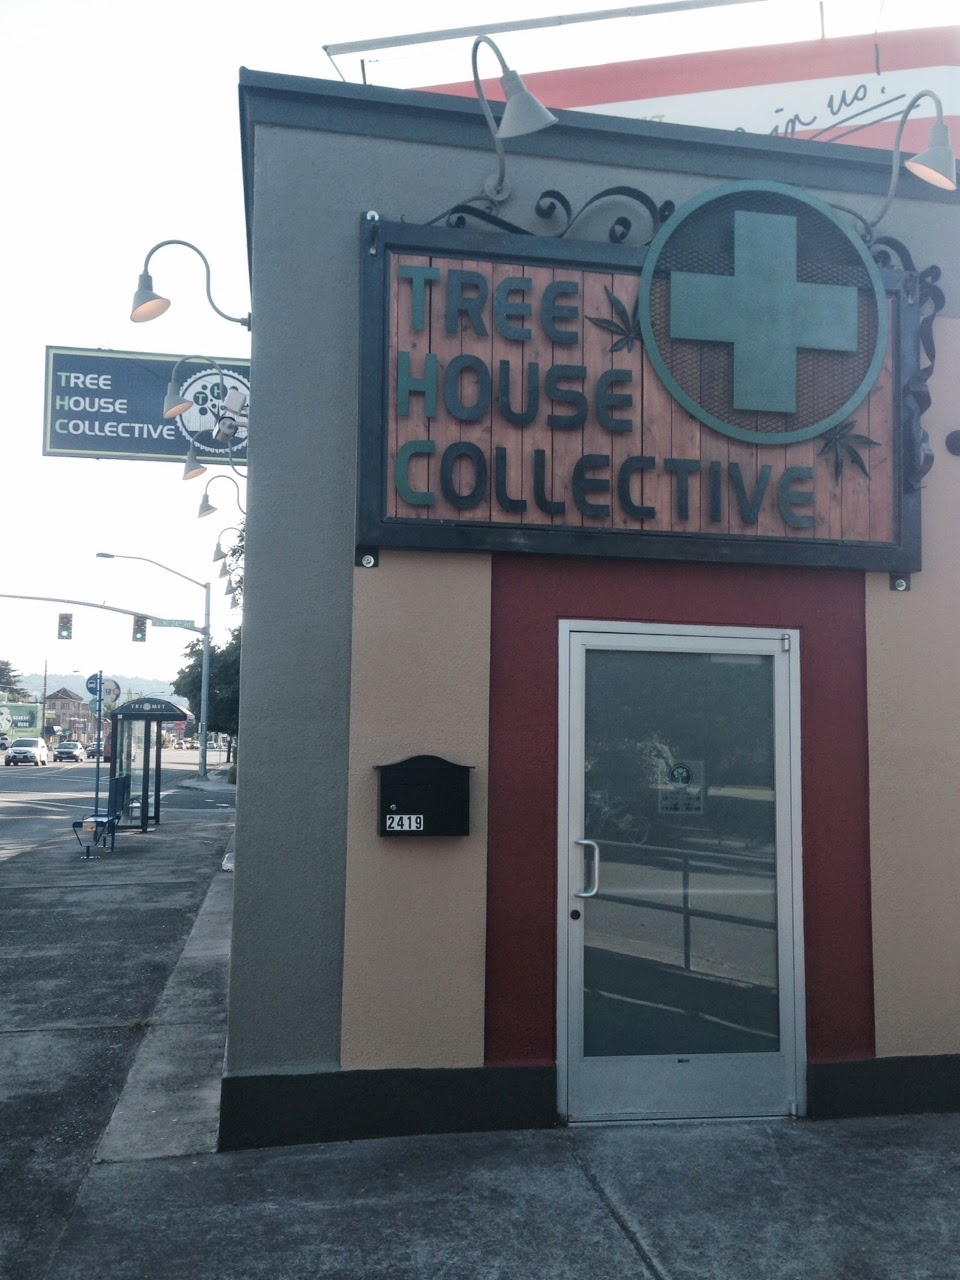 TreeHouse Collective